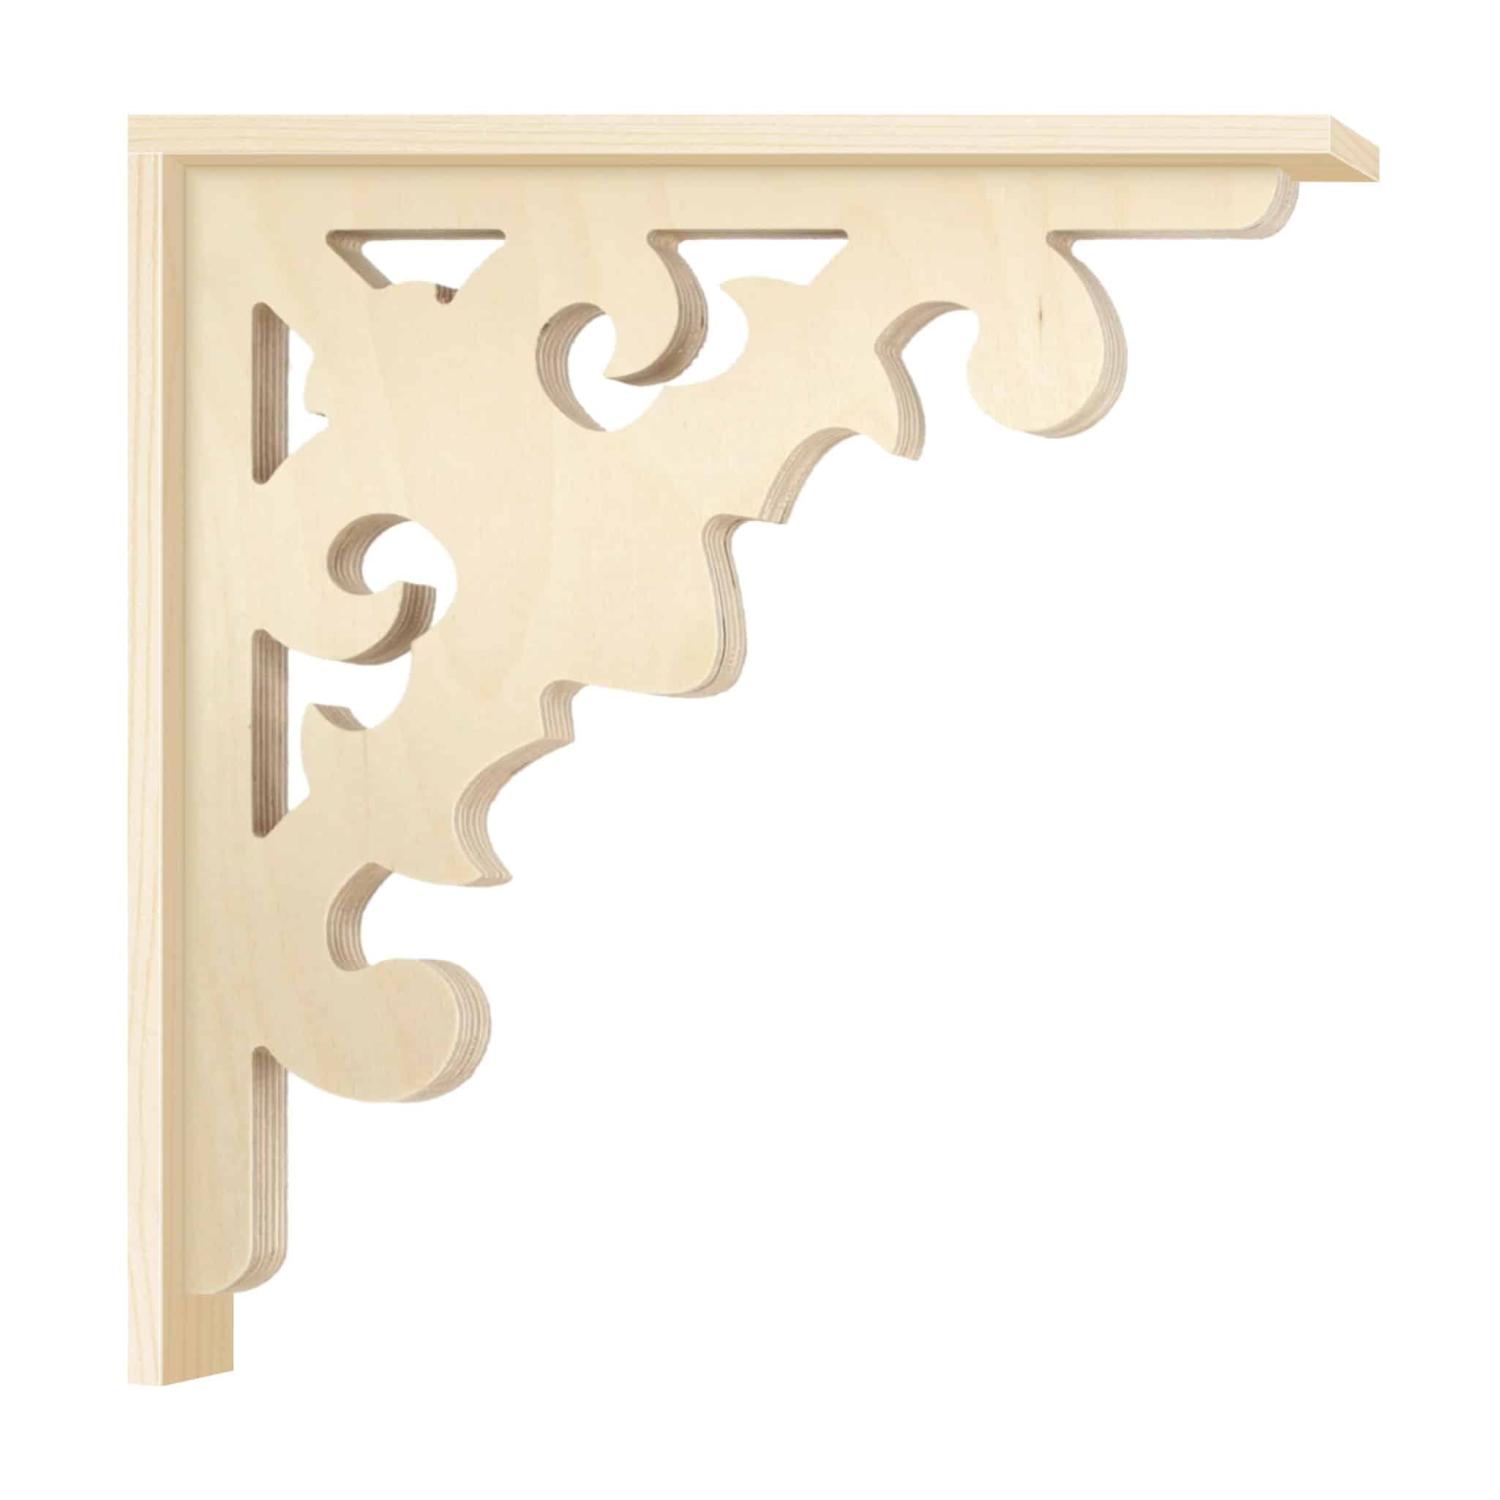 Bracket 090 – Victorian gingerbread corbel for porch and veranda with decorative wooden strip